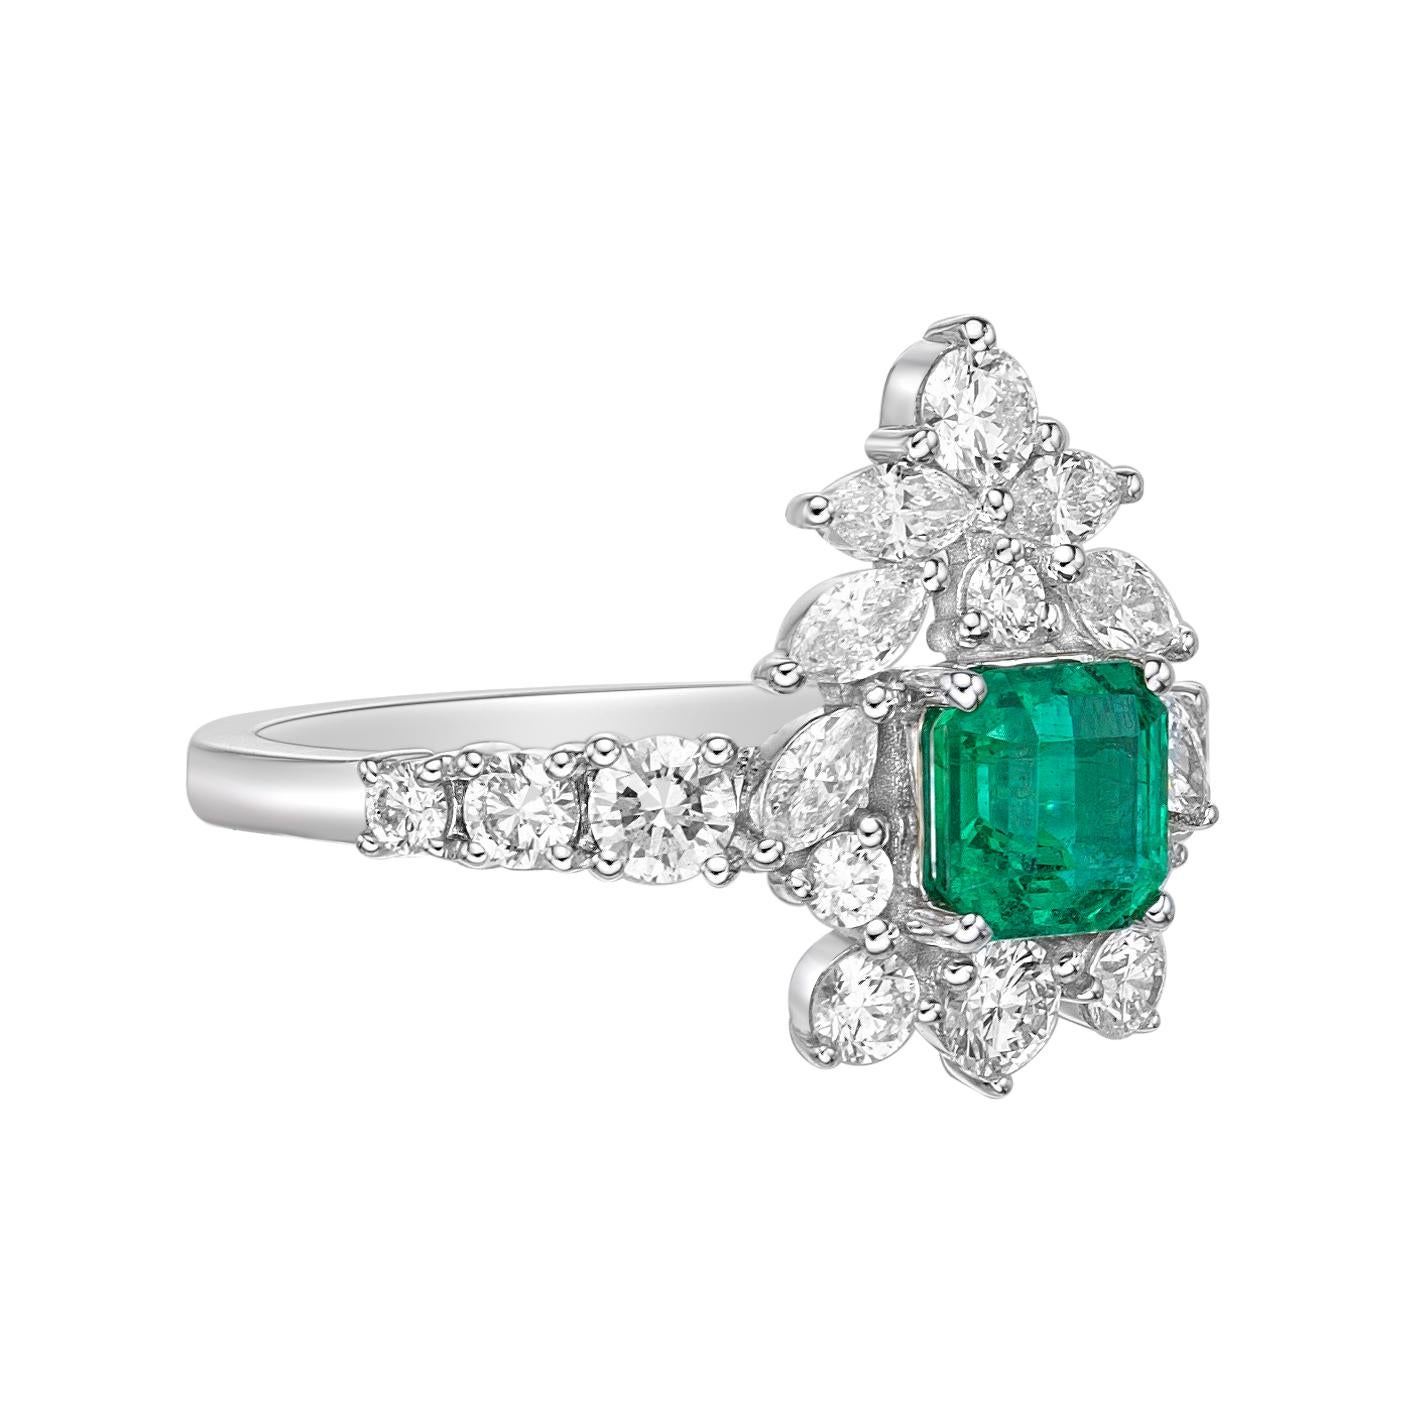 Octagon Cut Emerald and Diamond Ring & Earring Set in 18 Karat White Gold